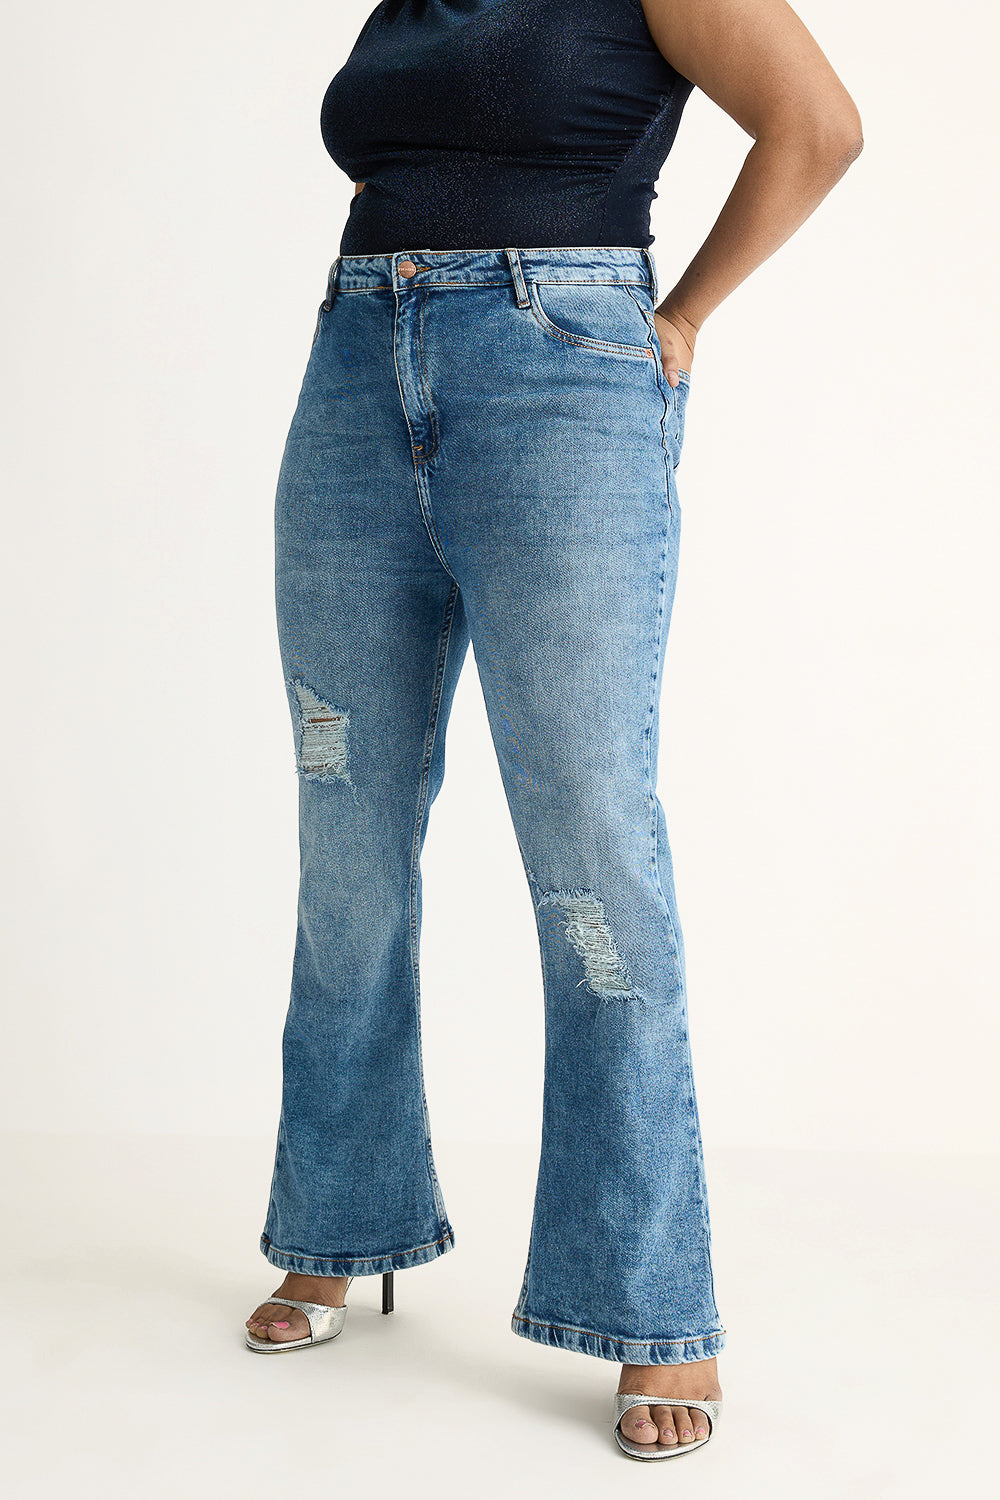 RADIANT CURVE DISTRESSED BOOTCUT JEANS